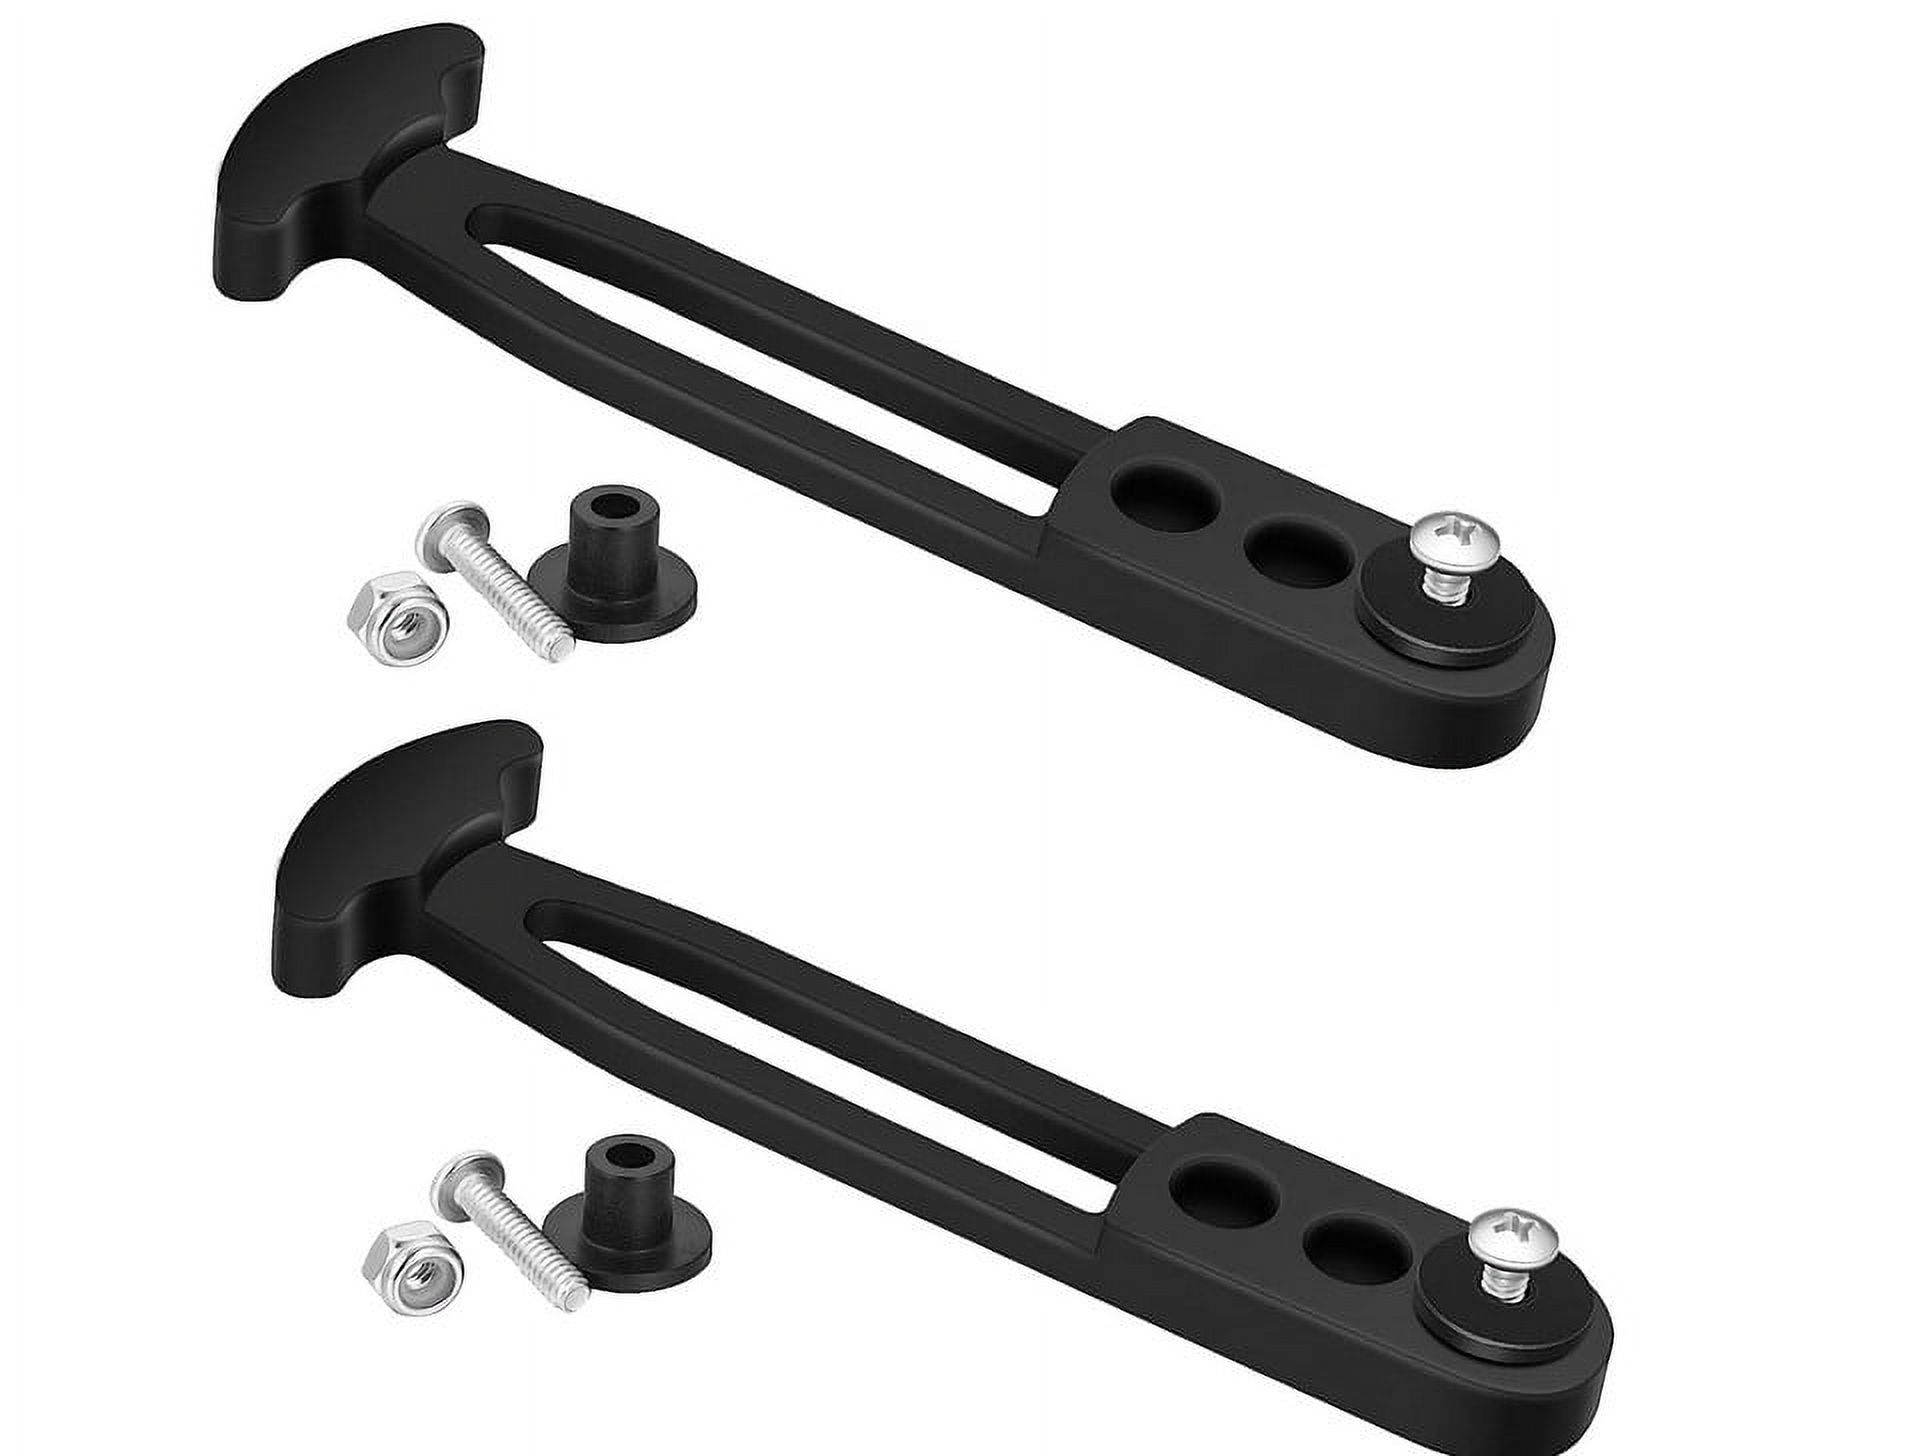 2pcs Telescoping Ladder Straps Boat Marine Retaining Rubber Latch Bands  with 3 Adjustable Holes 